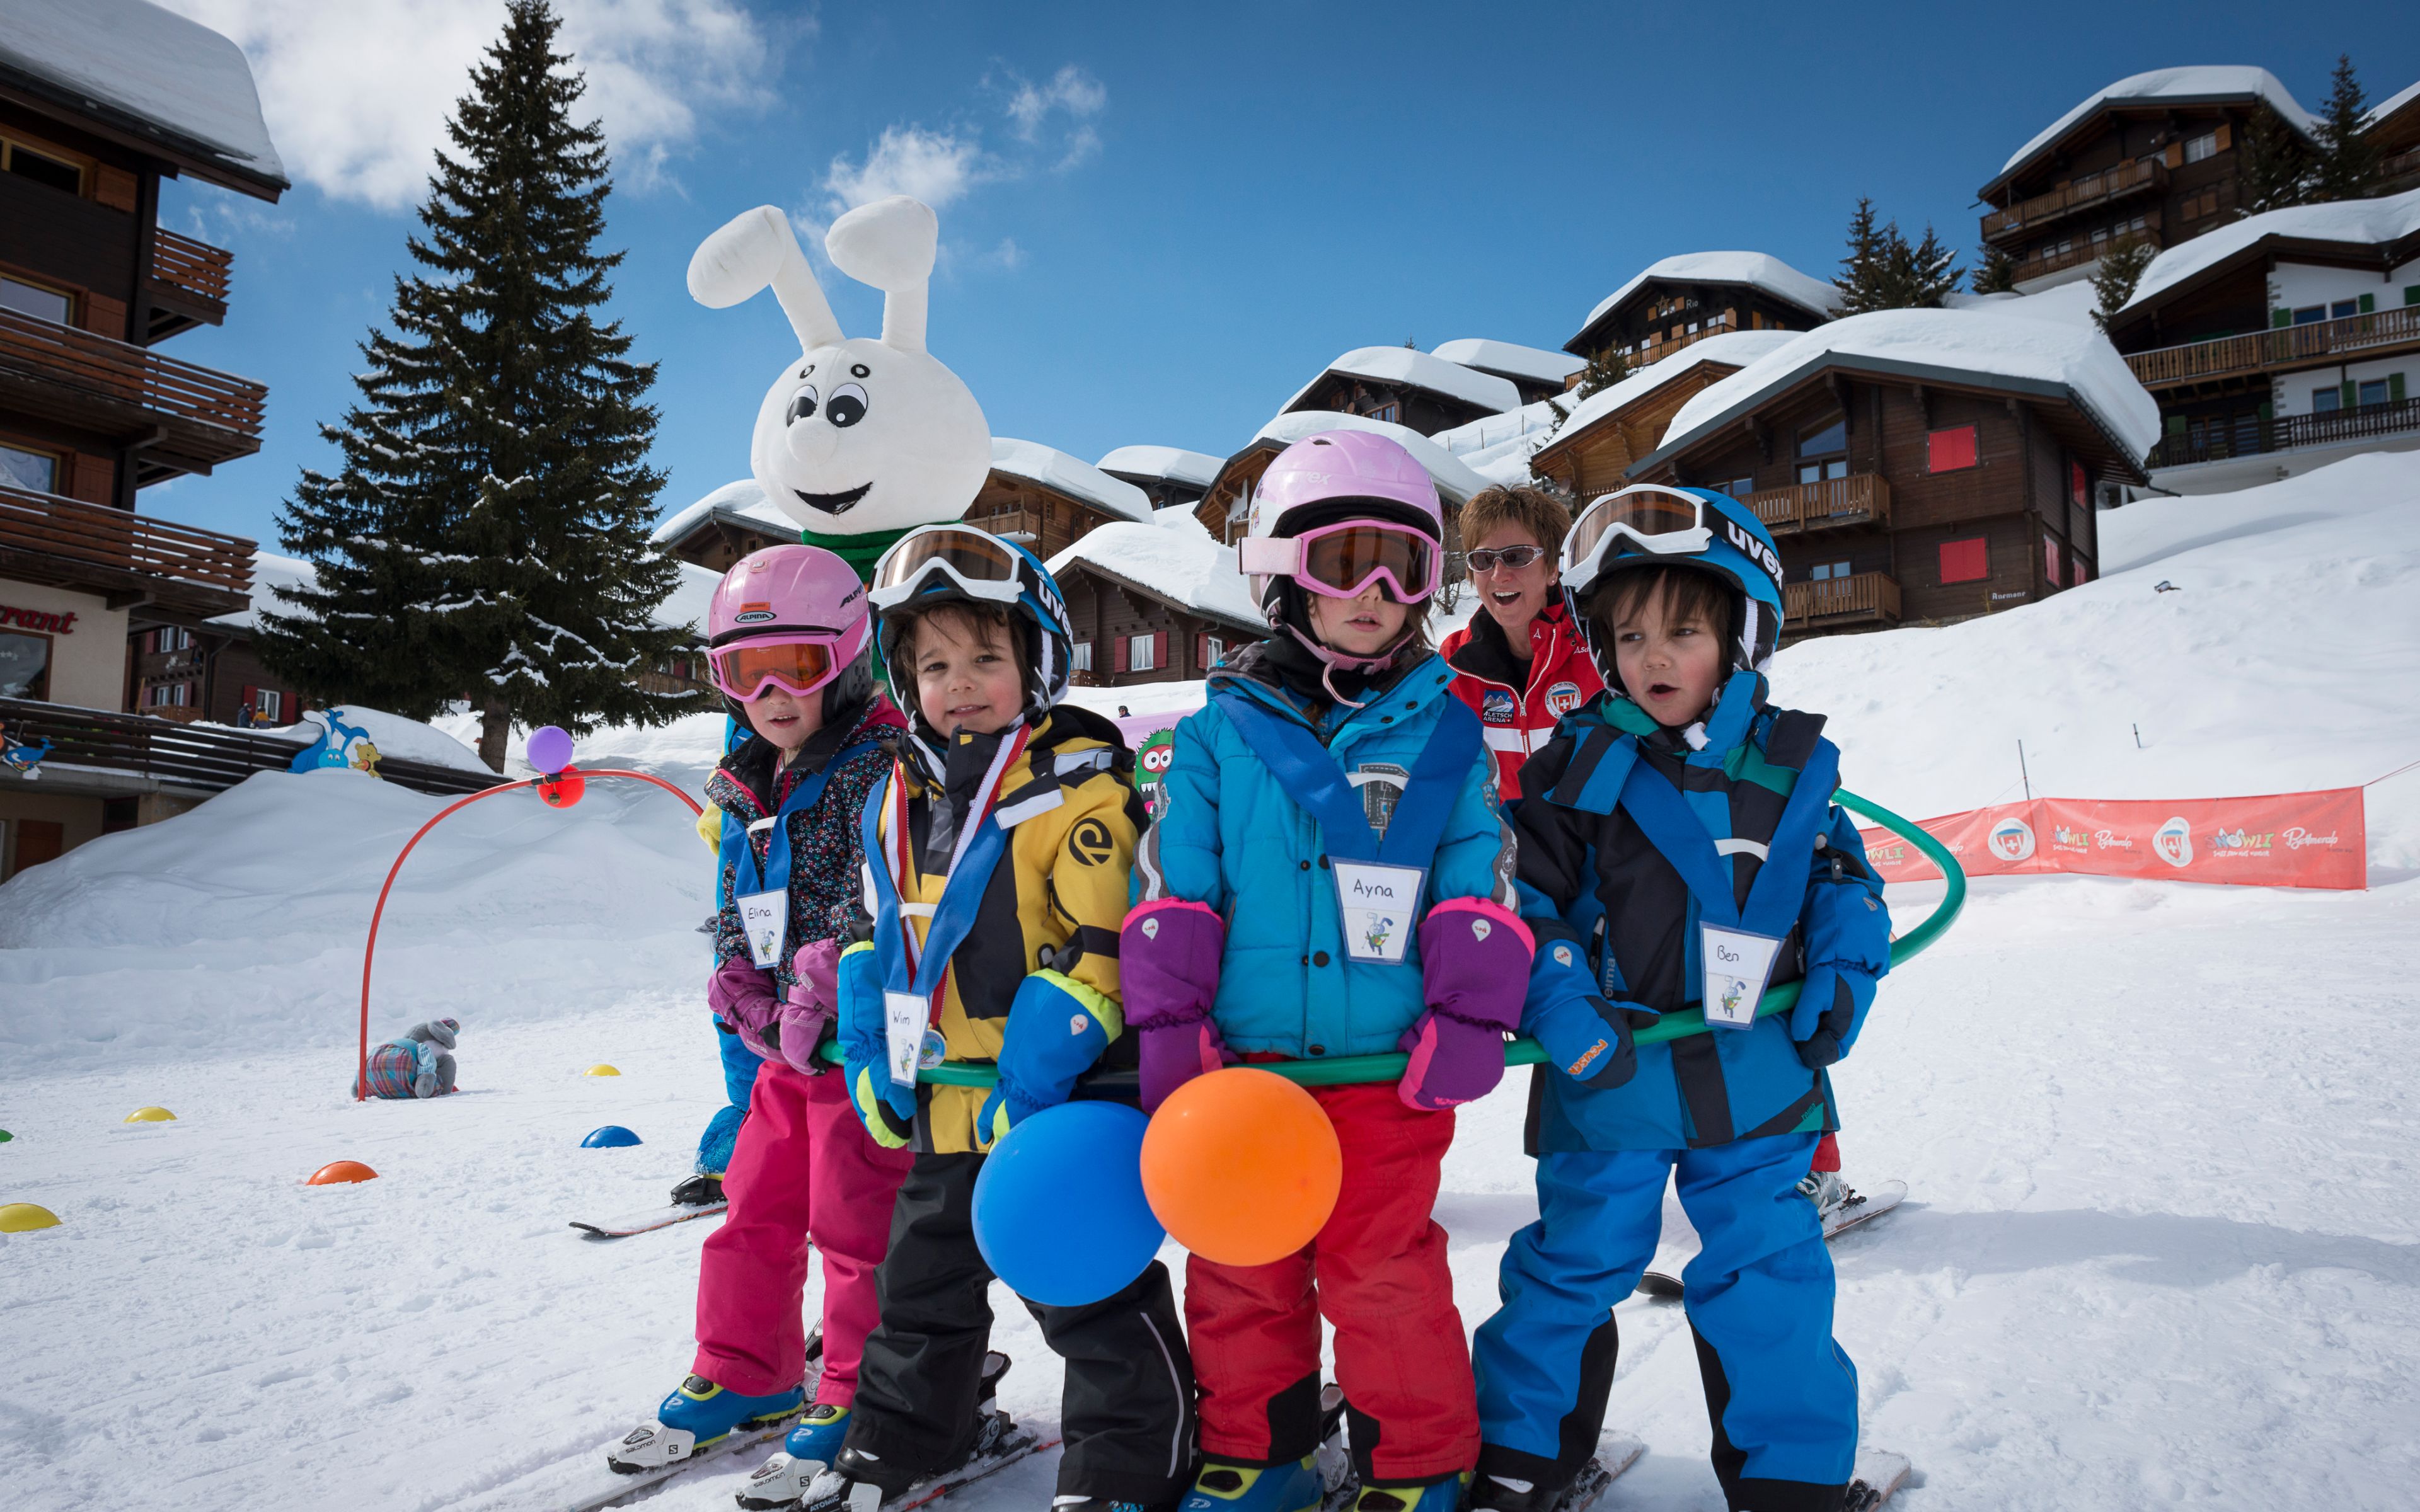 Group photo of the apprentice skiers at the snow garden in Bettmeralp with the mascot